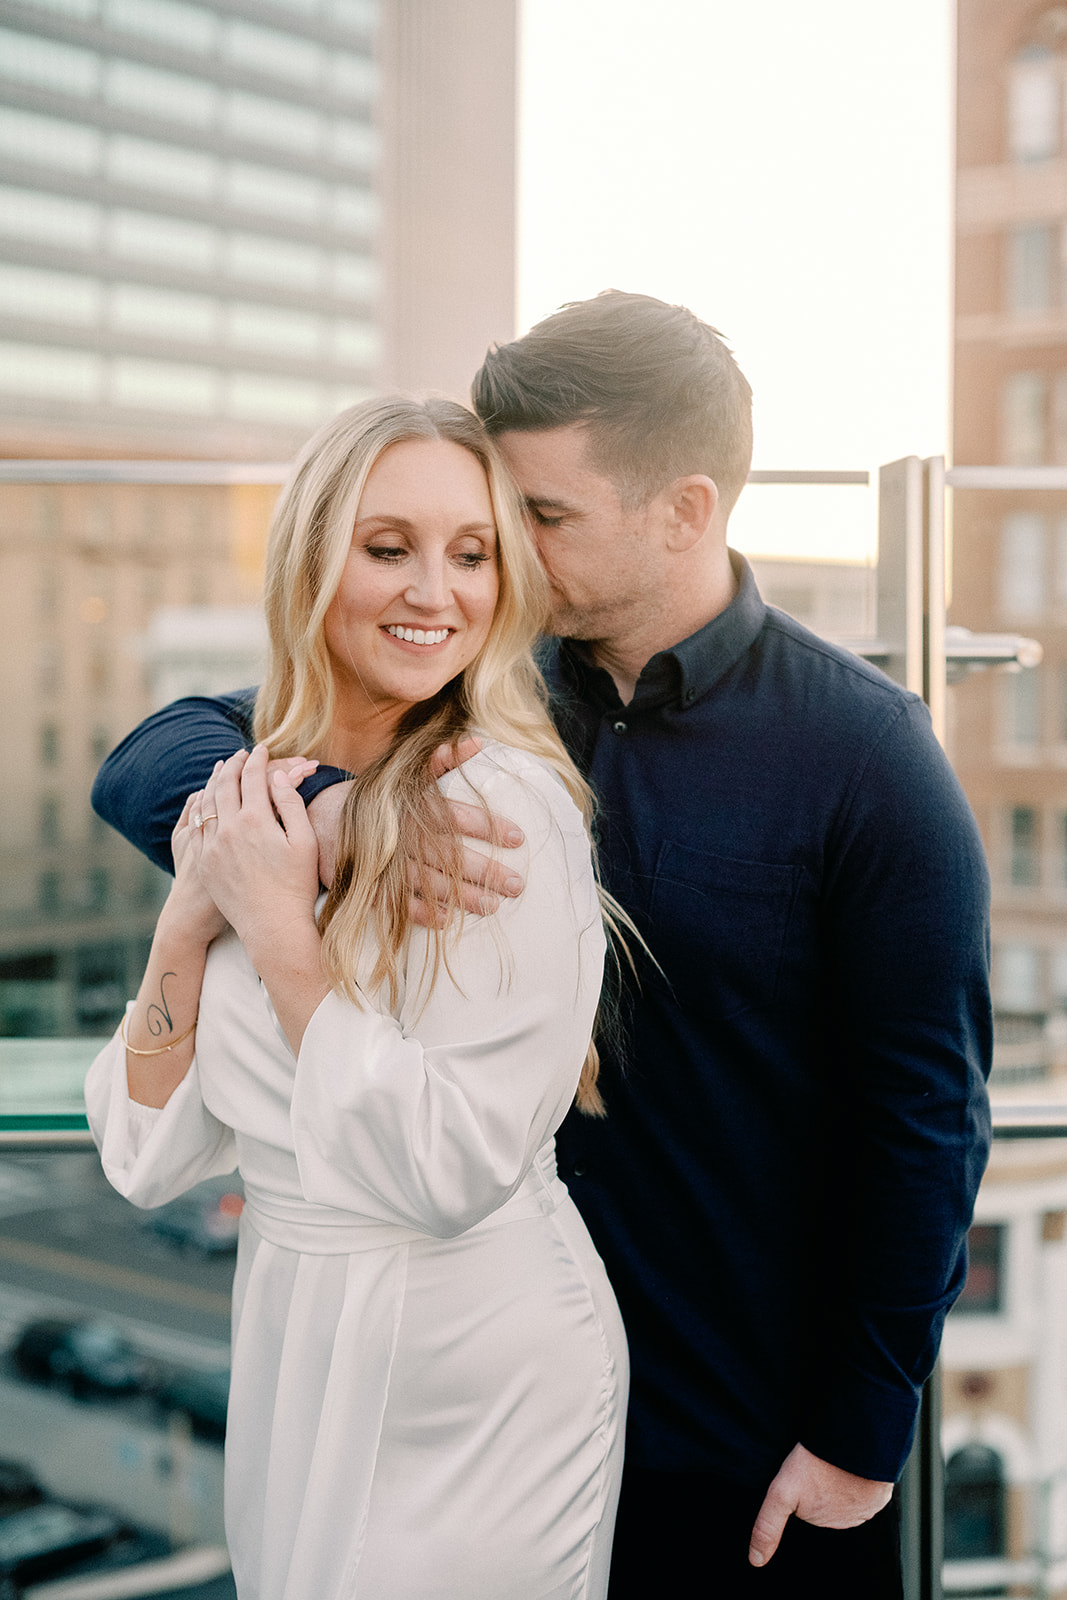 Rooftop Bar Engagement Session in Oakland California during sunset golden hour. High End Luxury Wedding Photographer. 